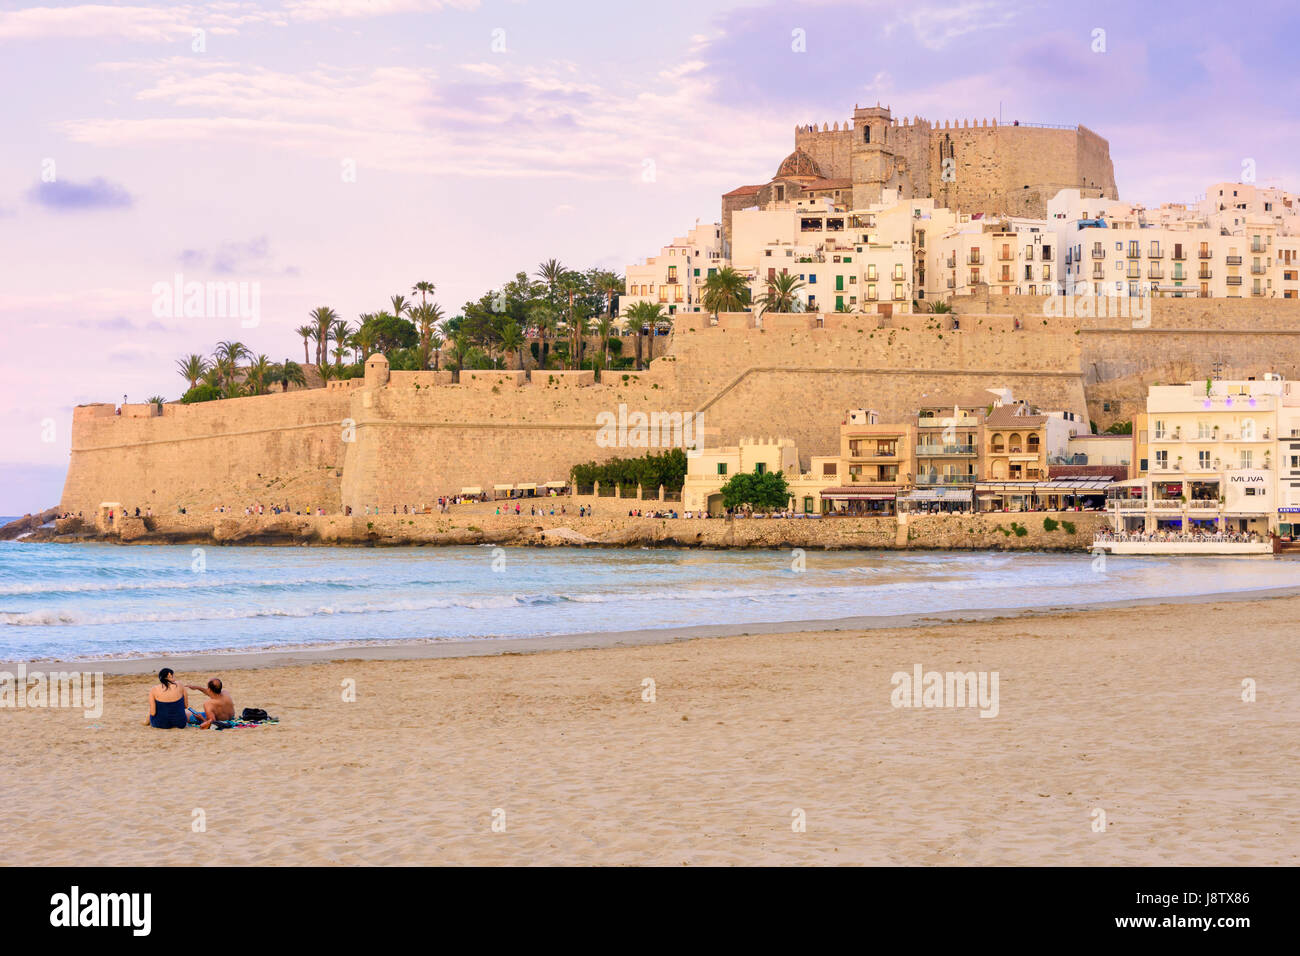 Papa Luna's Castle and old town overlooking a couple on Playa Norte beach at sunset, Peniscola, Spain Stock Photo